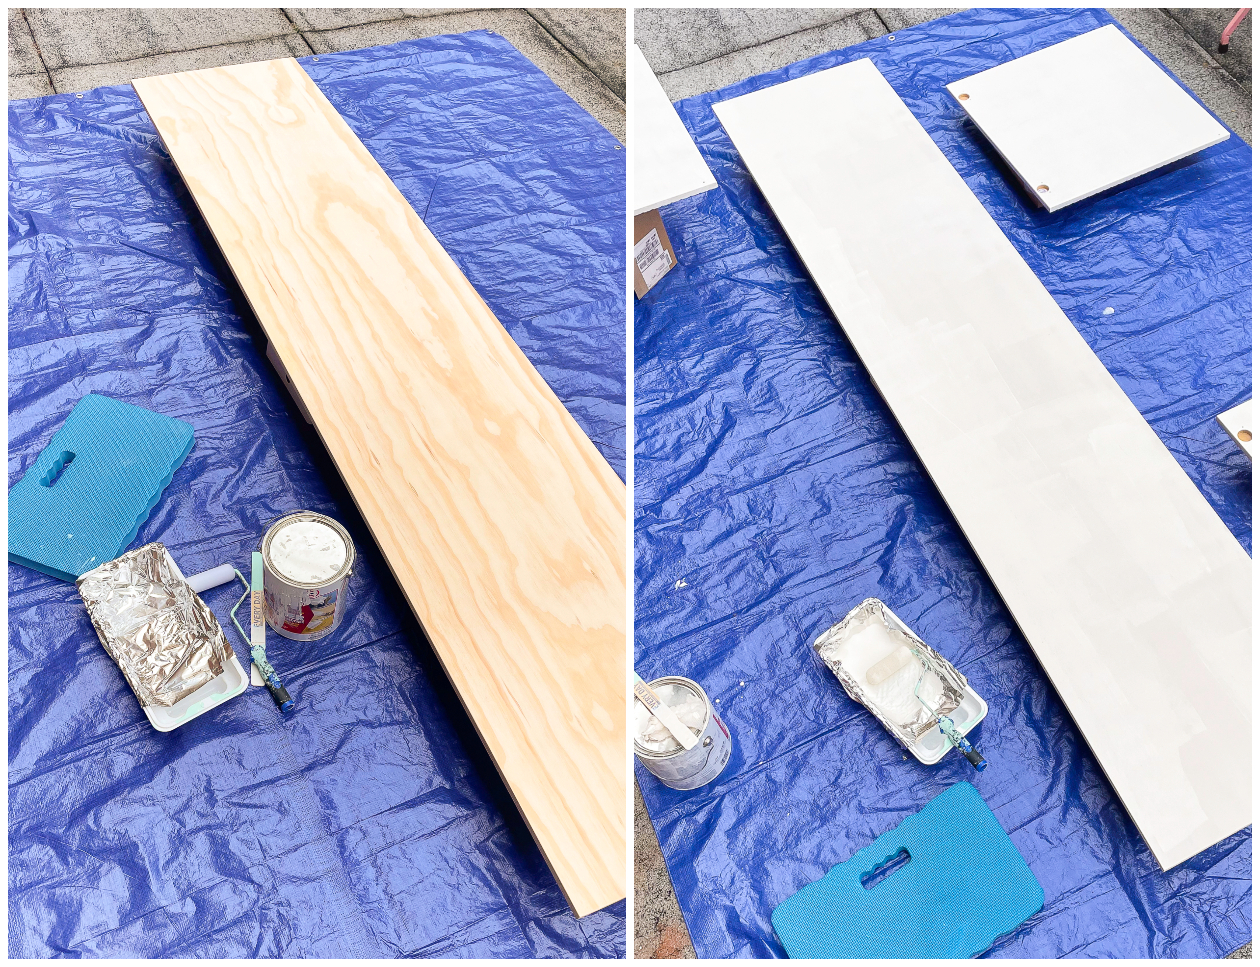 Ikea Desk Hack: Part III is all about how to paint metal Ikea legs and how to finish a wooden desk top. Add some color to your office with this DIY Desk project!